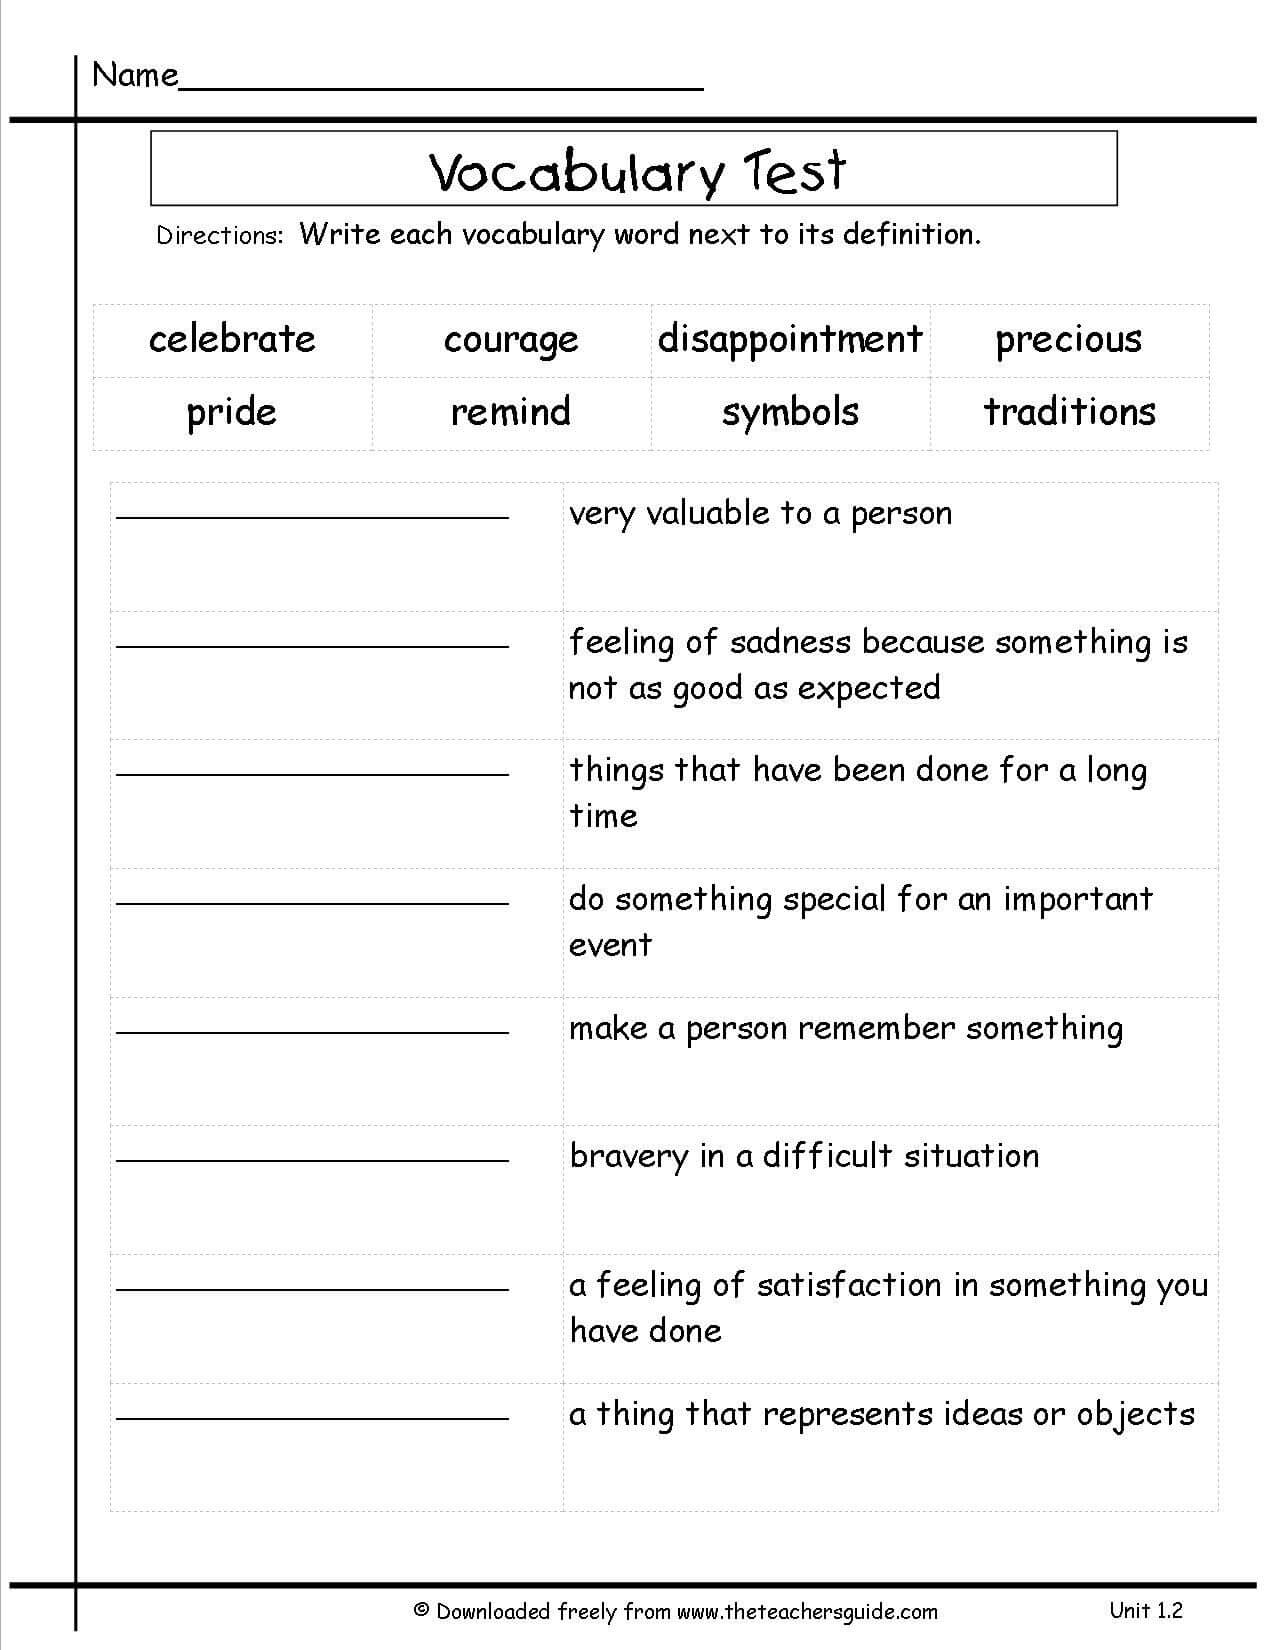 Pin On Education Reading With Vocabulary Words Worksheet Template Professional Template